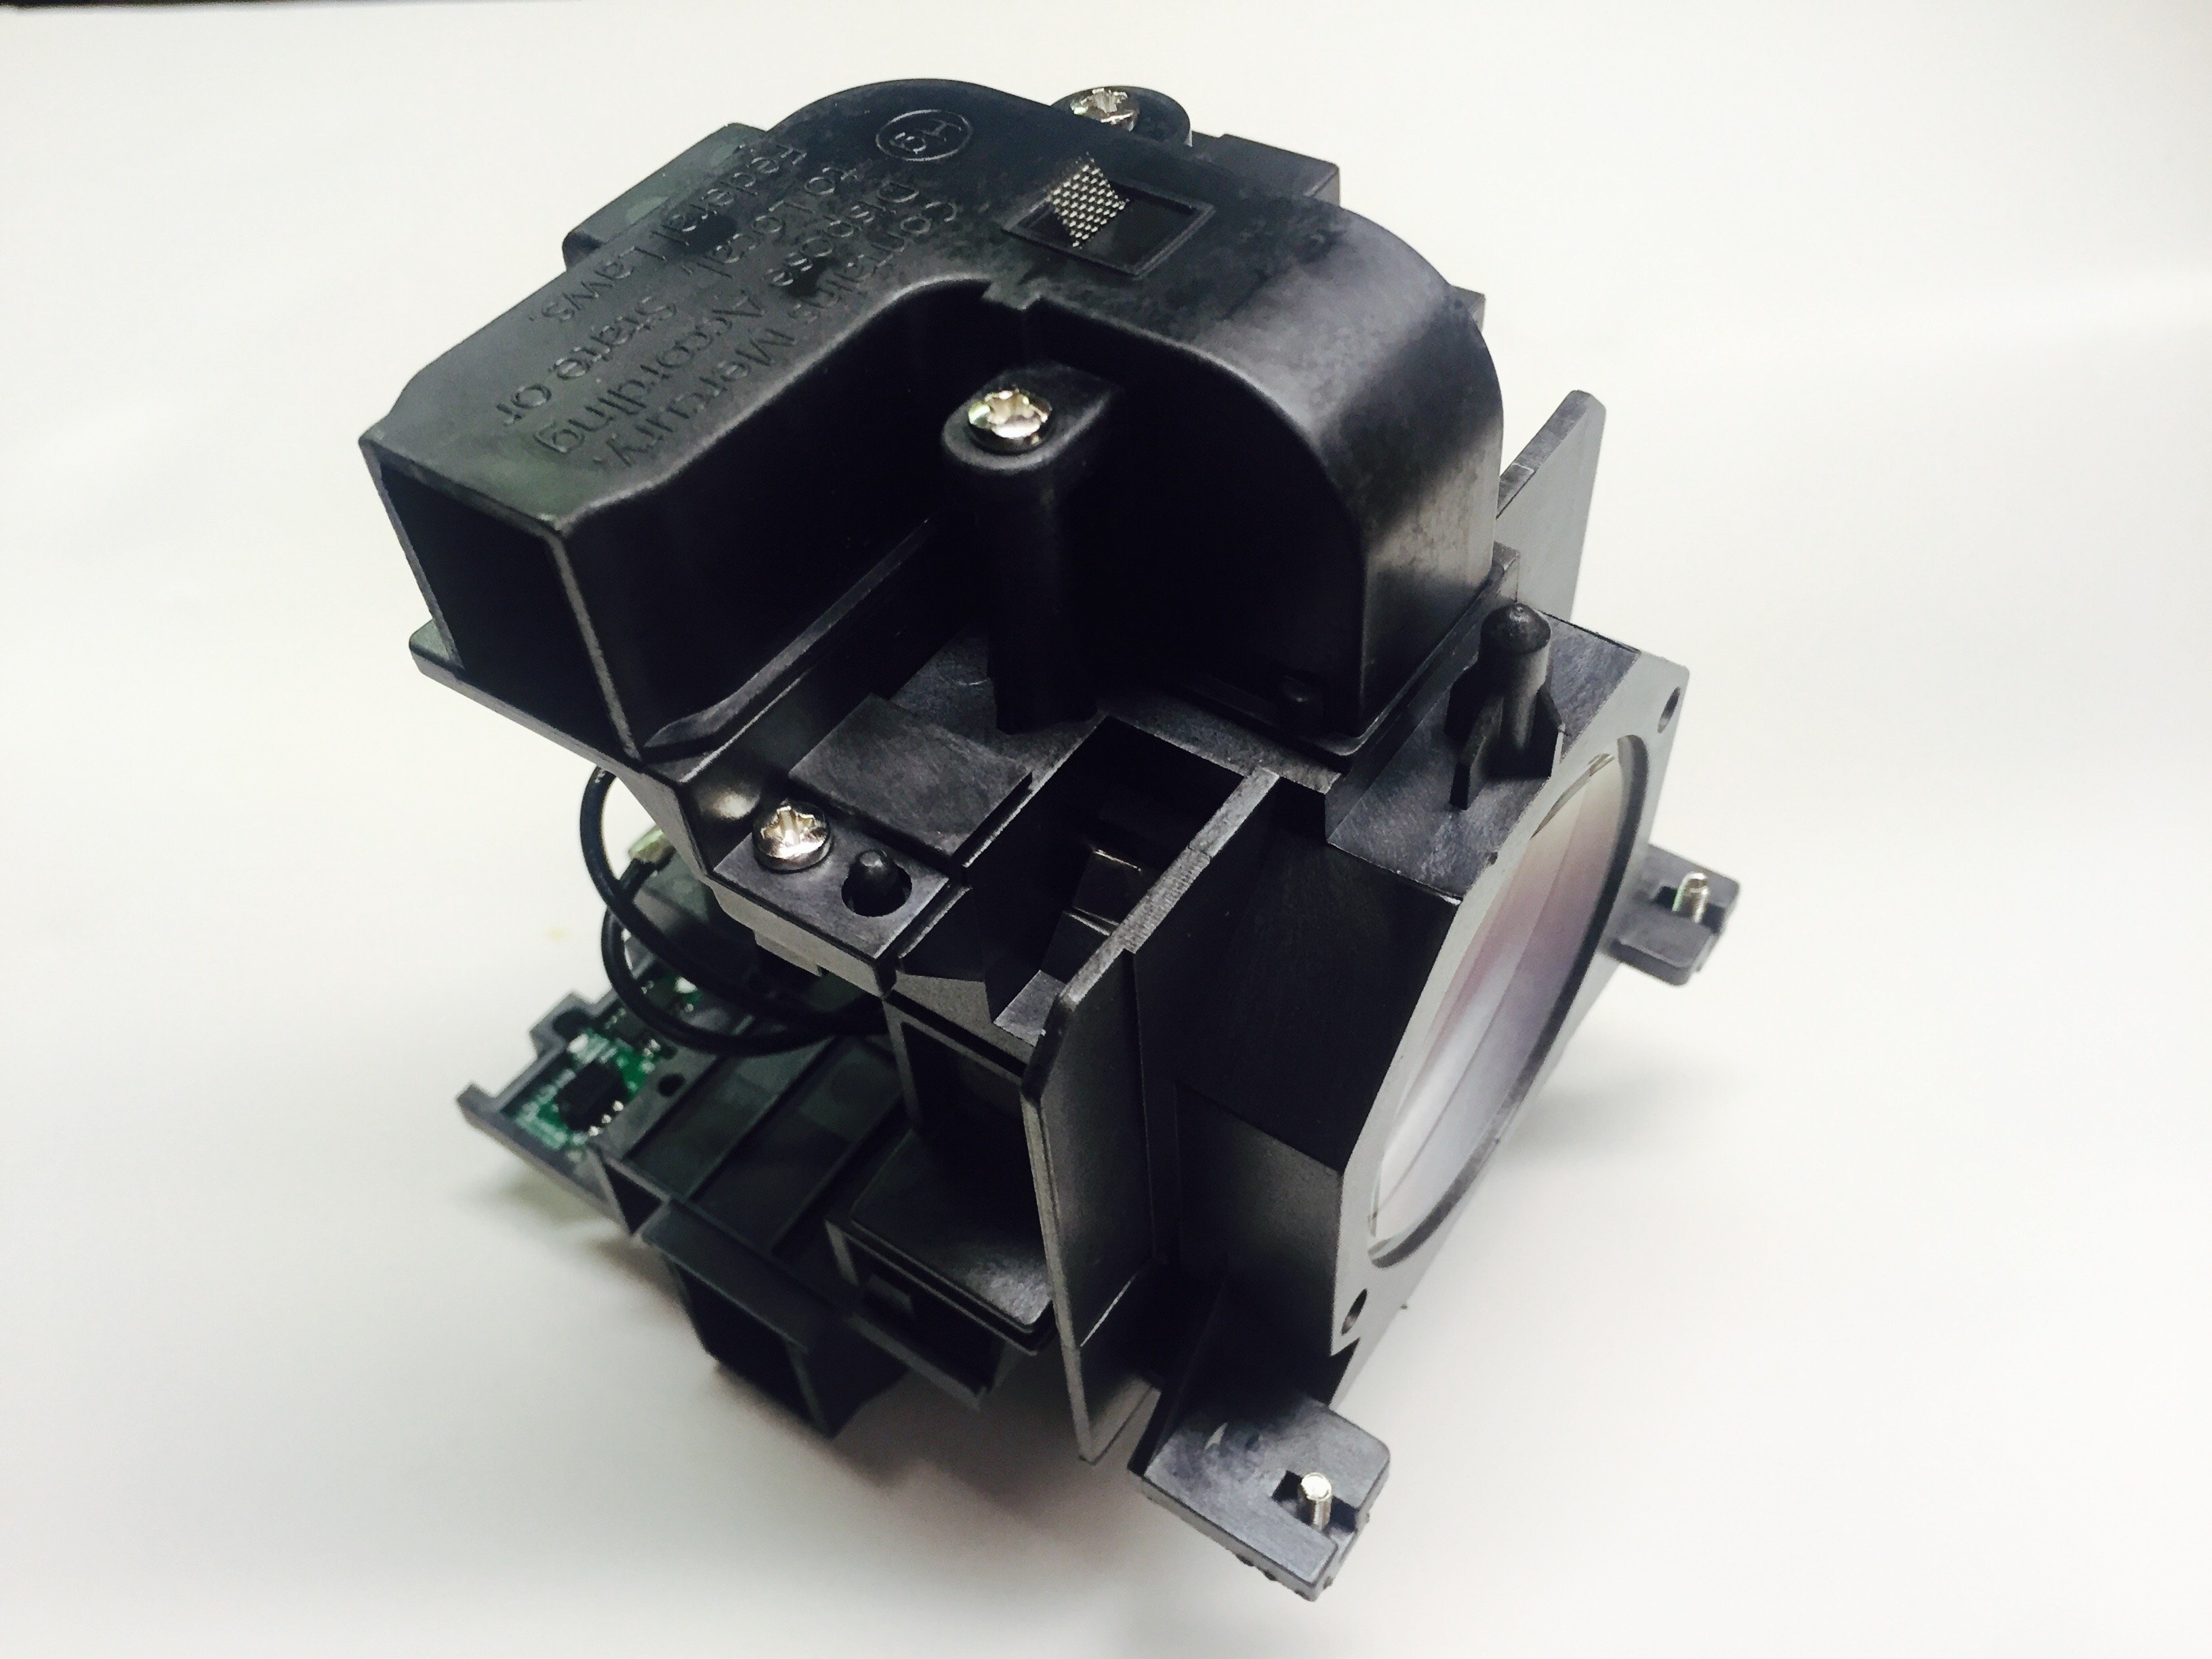 OEM ET-LAE200 Replacement Lamp & Housing for Panasonic Projectors - image 1 of 7